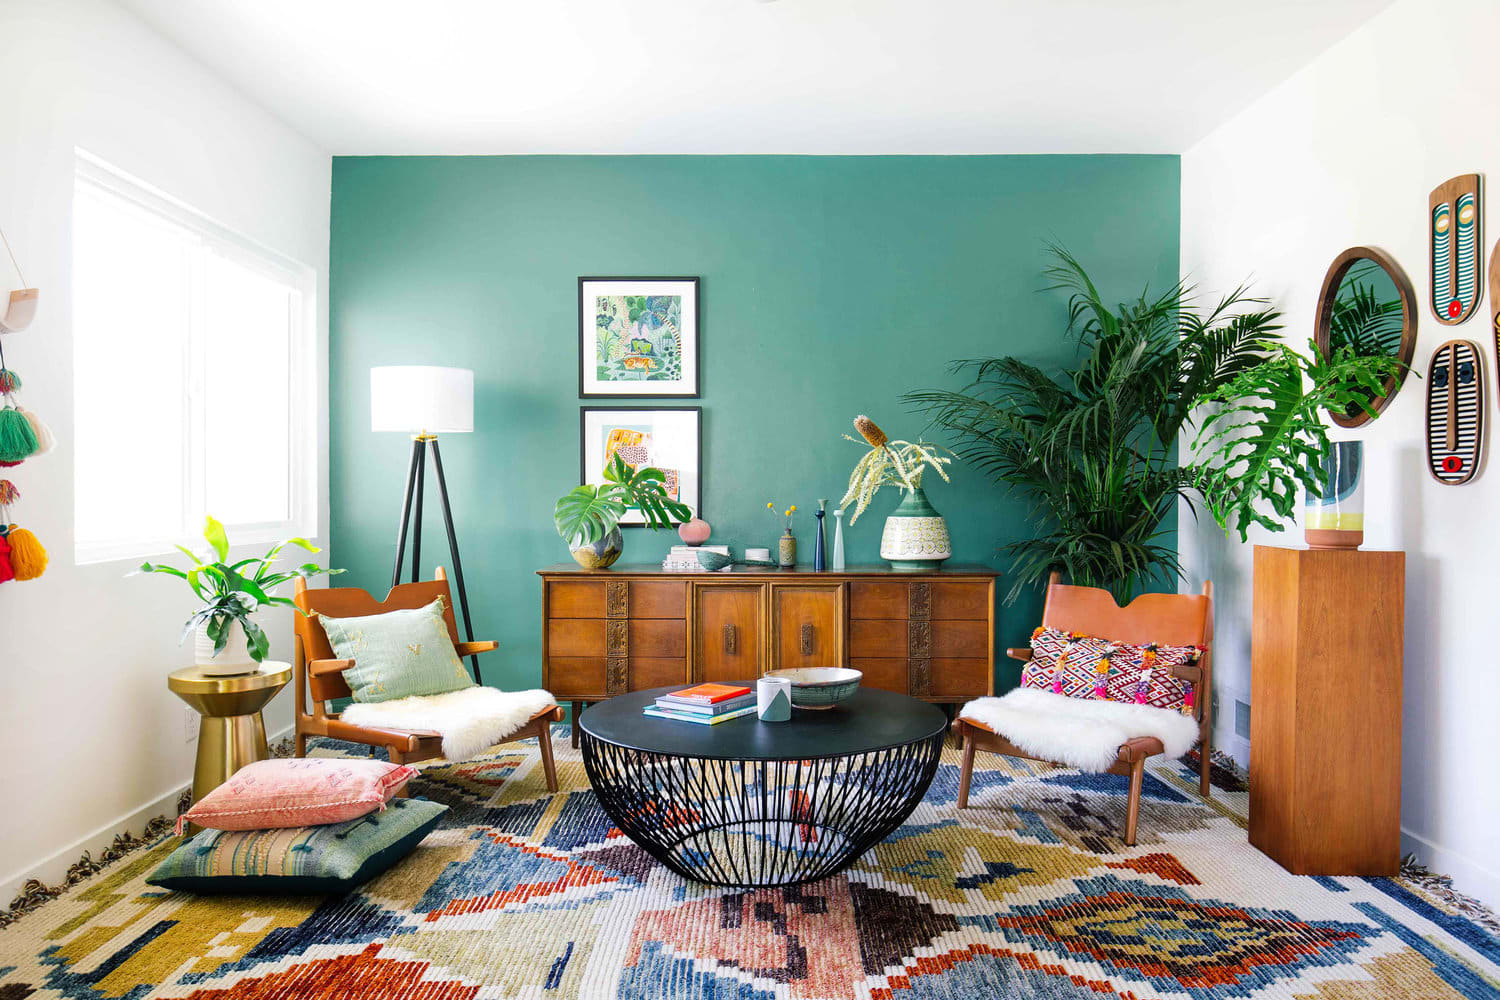 30 Easy and Unexpected Living Room Decorating Ideas